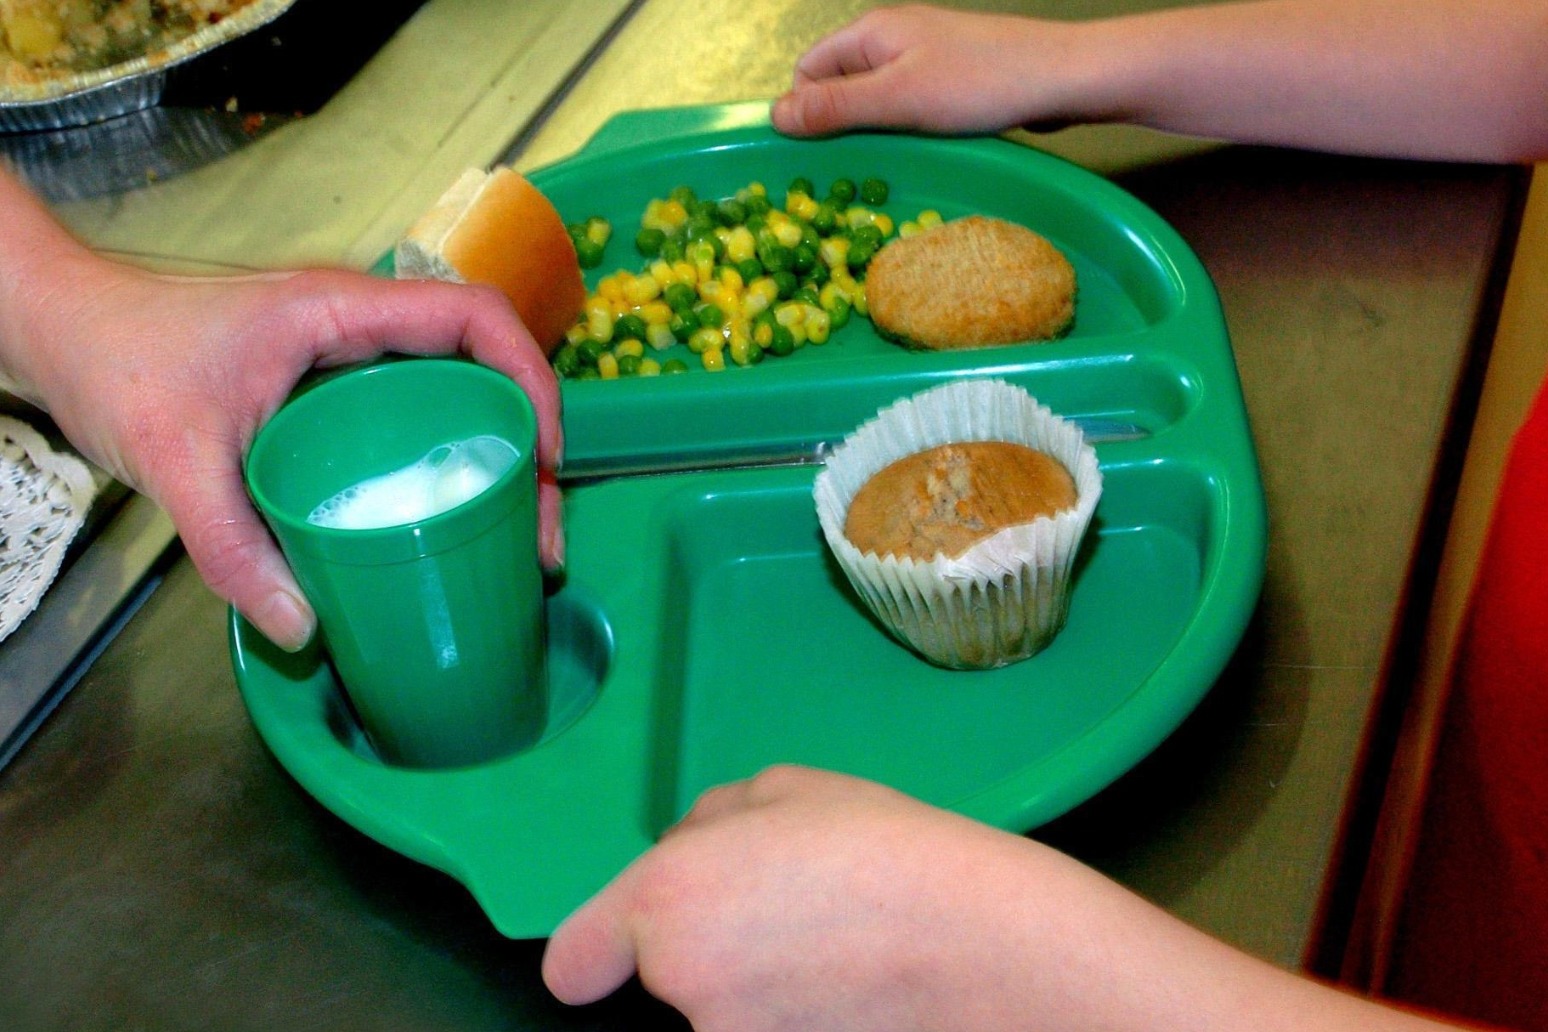 Reception children in Wales to receive free school meals from September 